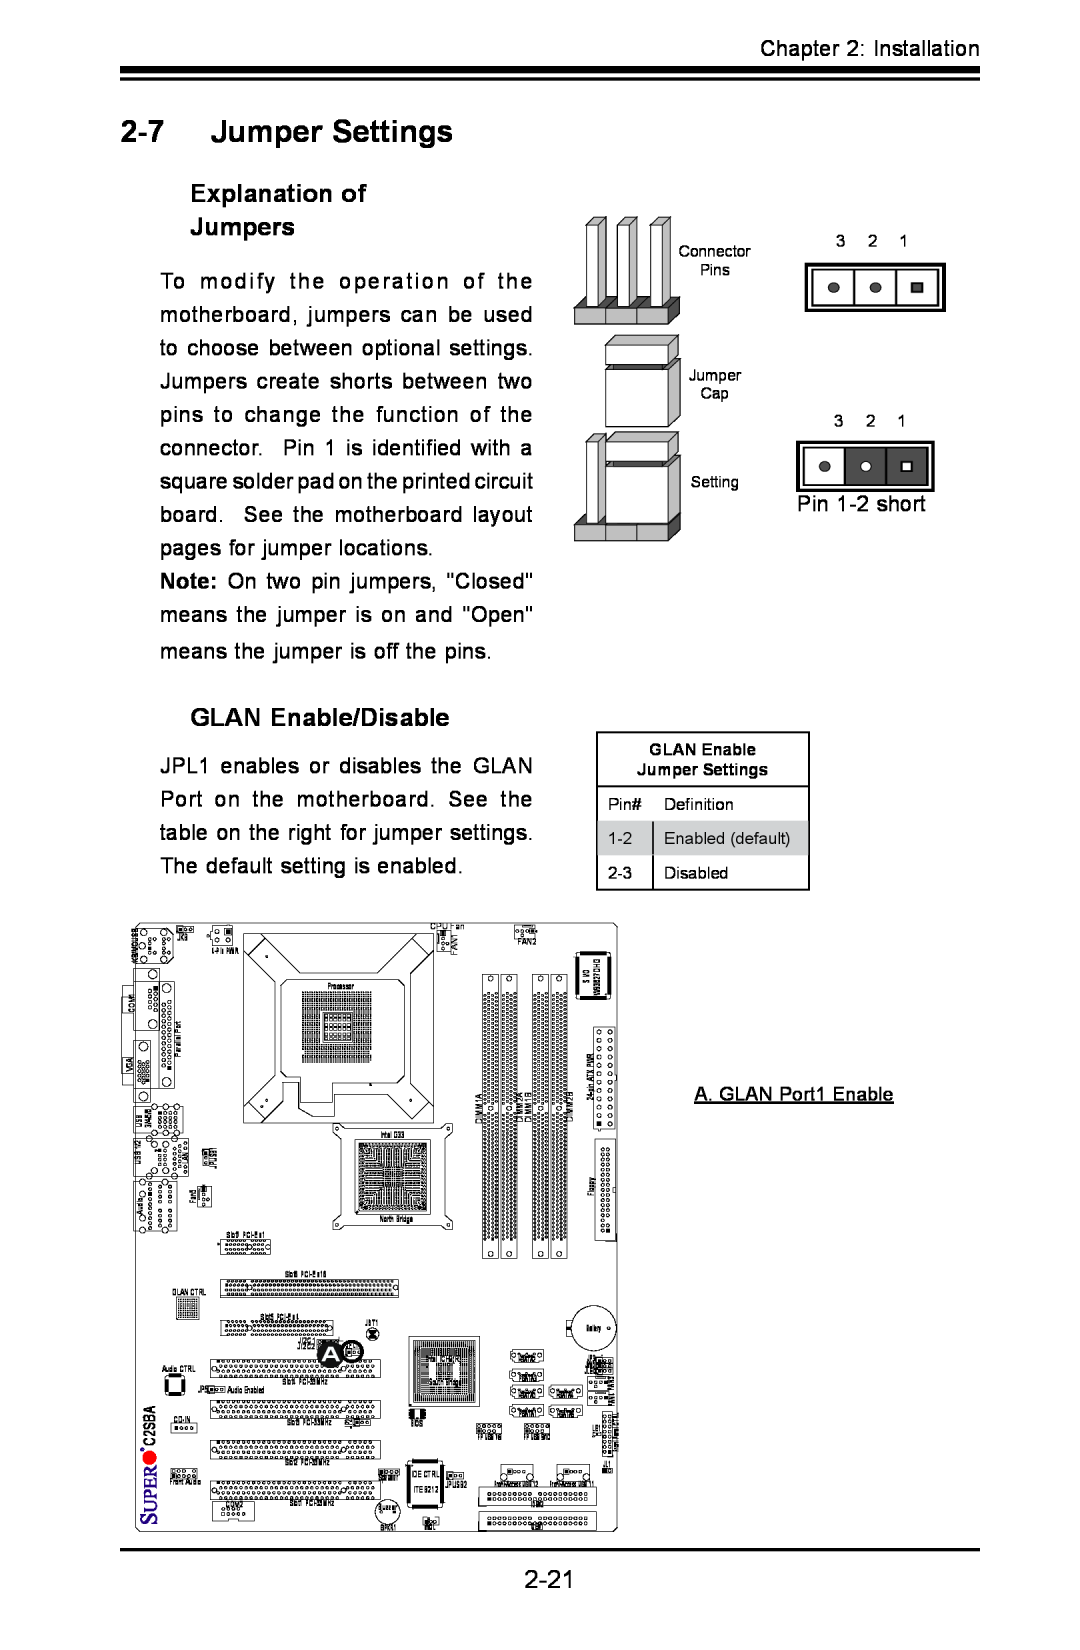 SUPER MICRO Computer C2SBE, C2SBA+II user manual Jumper Settings, Explanation of Jumpers, GLAN Enable/Disable 